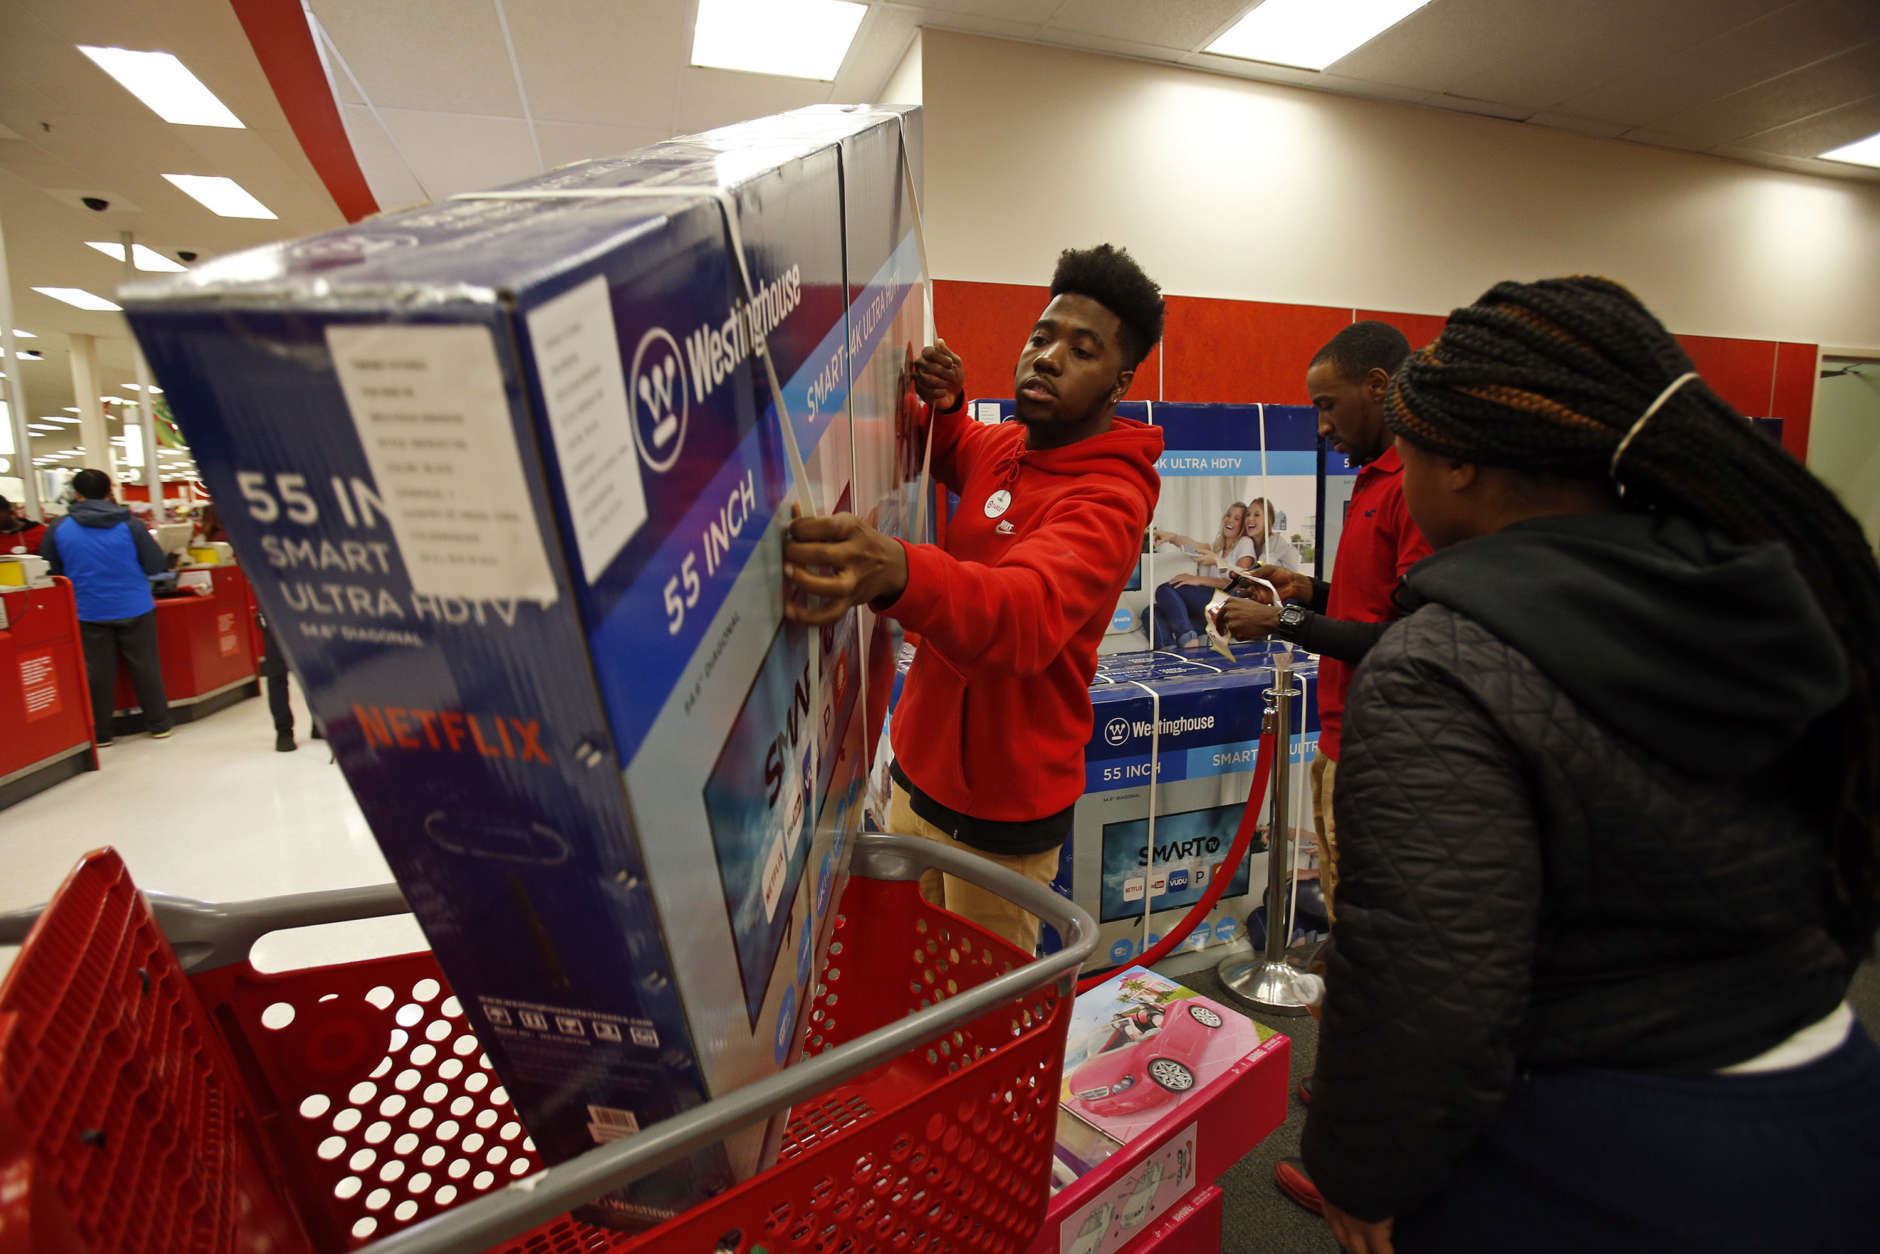 IMAGE DISTRIBUTED FOR TARGET - A Target team member assists a customer with a TV purchase on Thursday, Nov. 23, 2017, in Jersey City, N.J. (Adam Hunger/AP Images for Target)